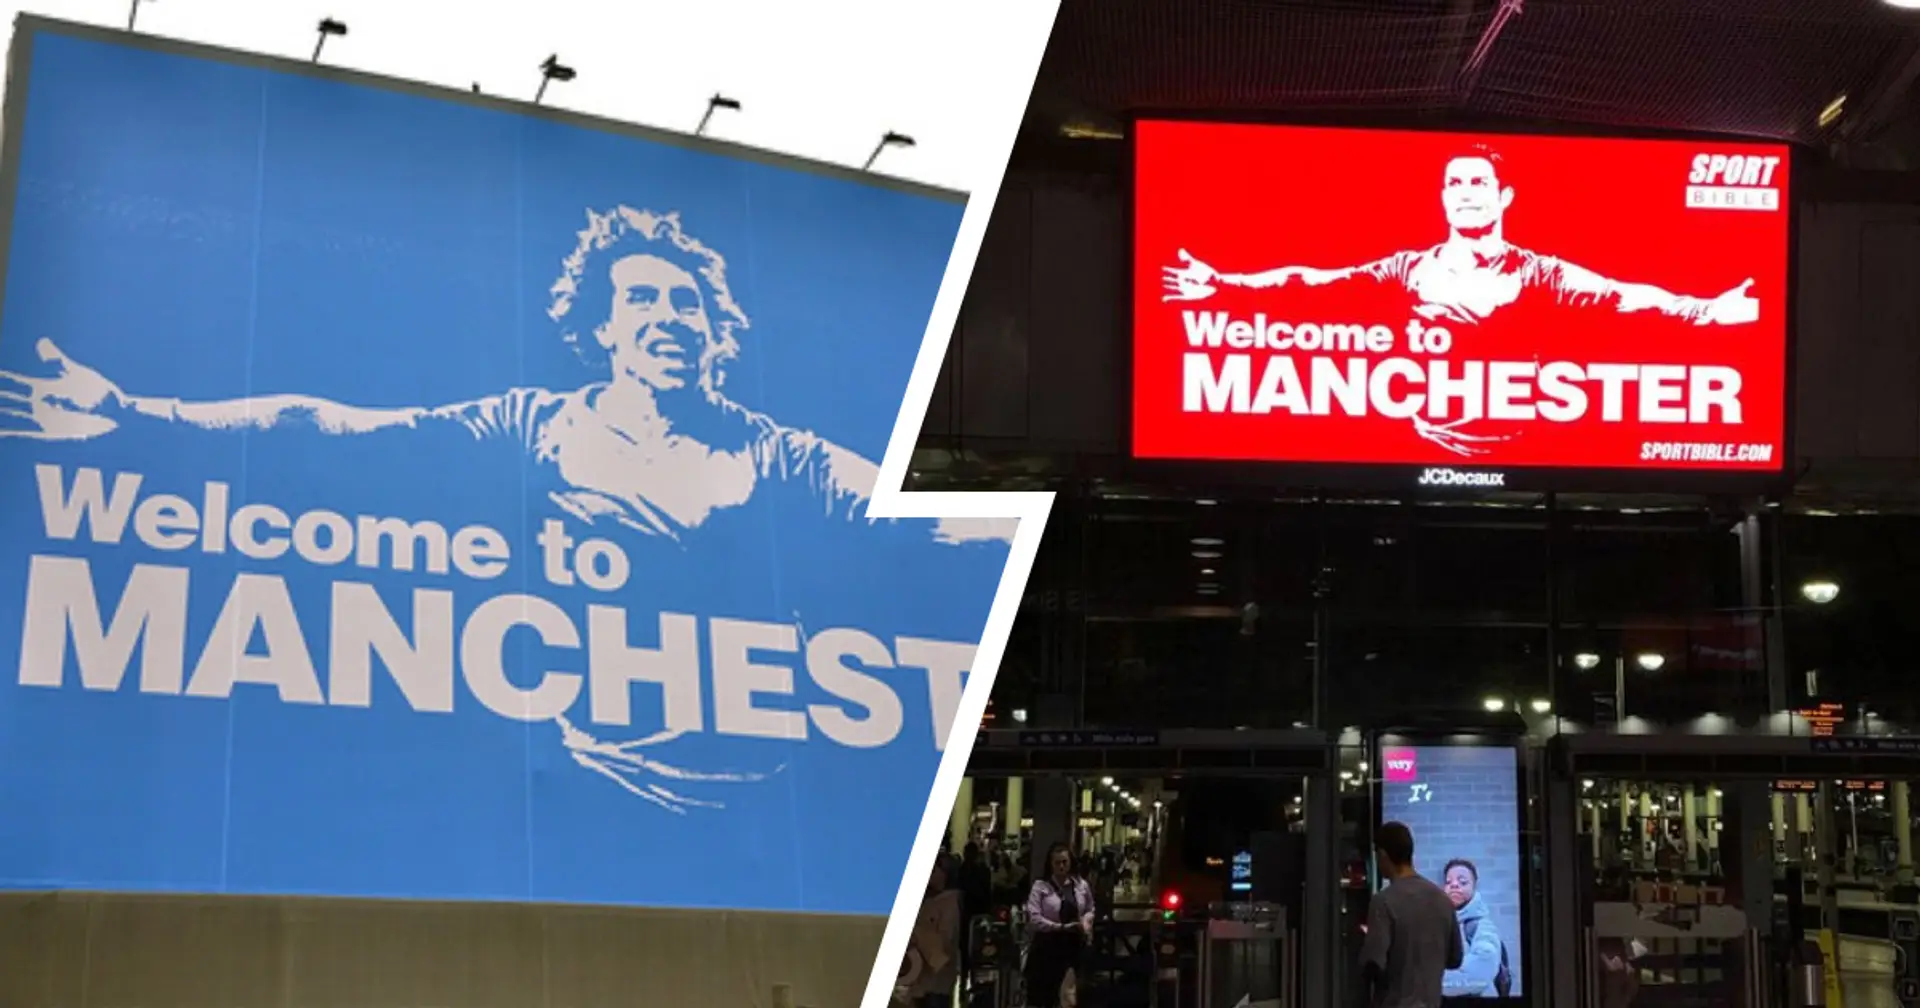 Carlos Tevez style 'Welcome to Manchester' billboard spotted as Man City miss out on Ronaldo